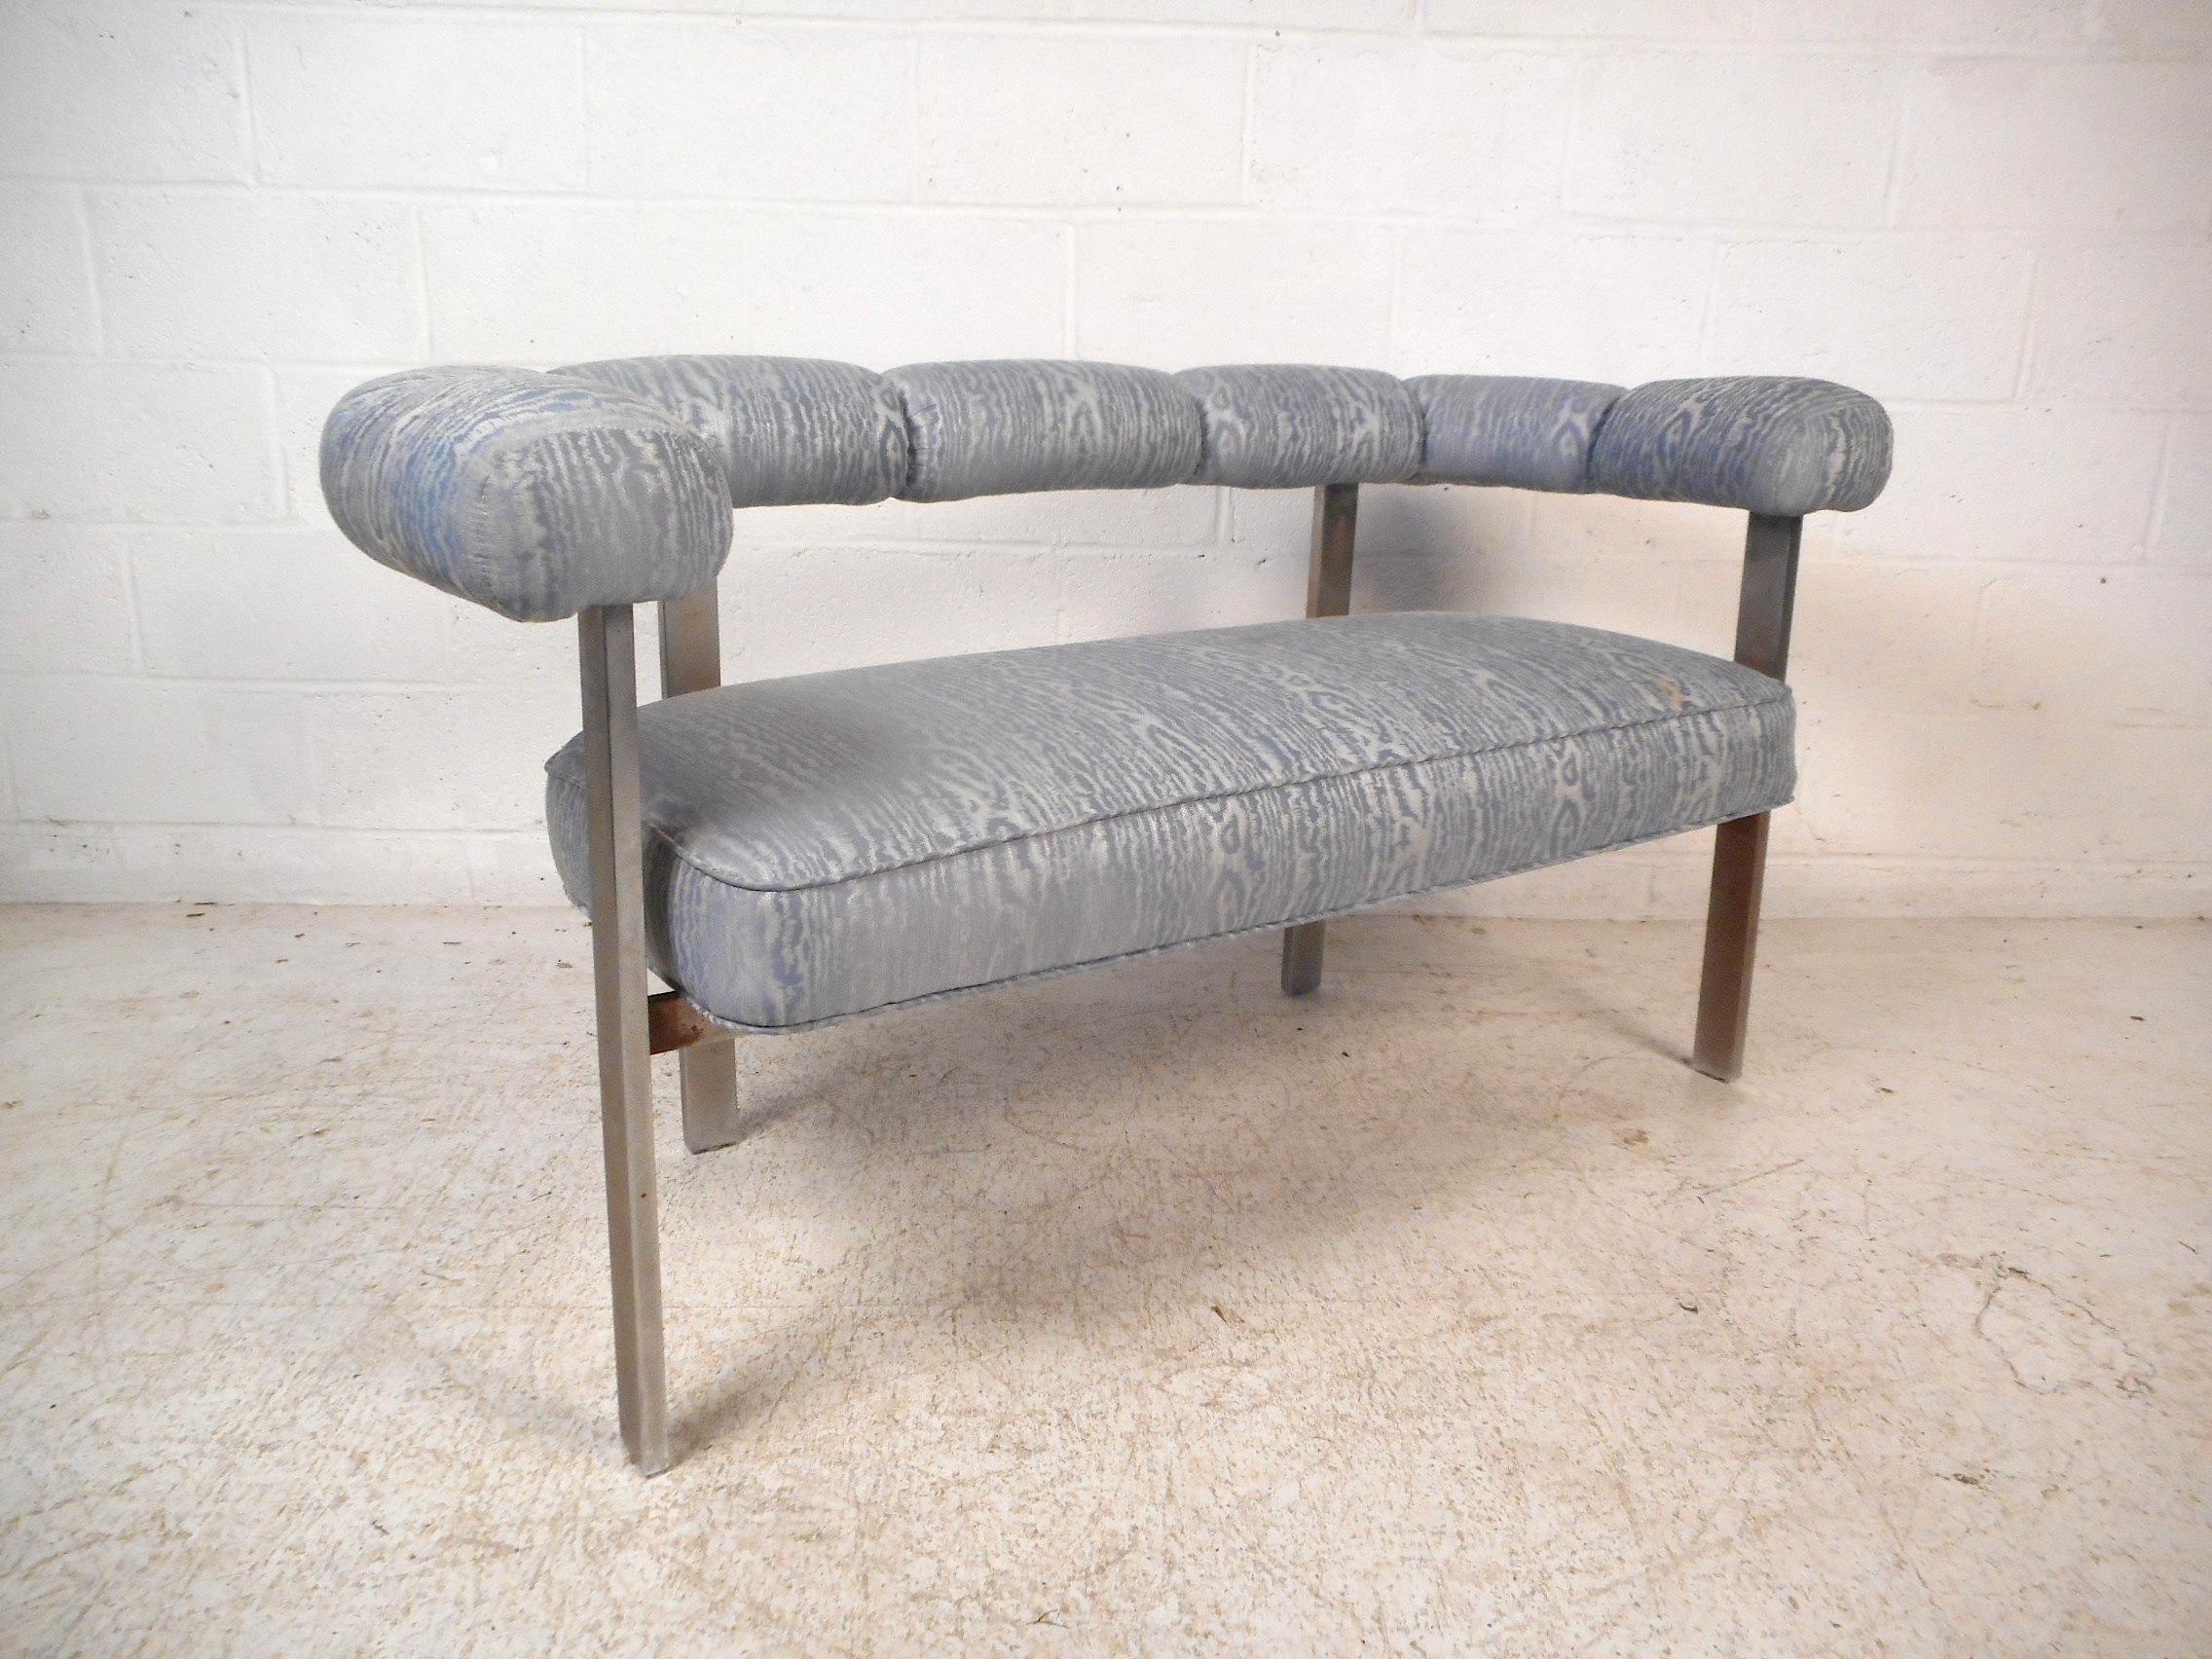 Unusual midcentury upholstered bench with a sturdy chrome frame. Comfortable and spacious seating area, with padded arm/backrests covered in a textured light blue vintage upholstery. An interesting addition to any modern interior. Please confirm